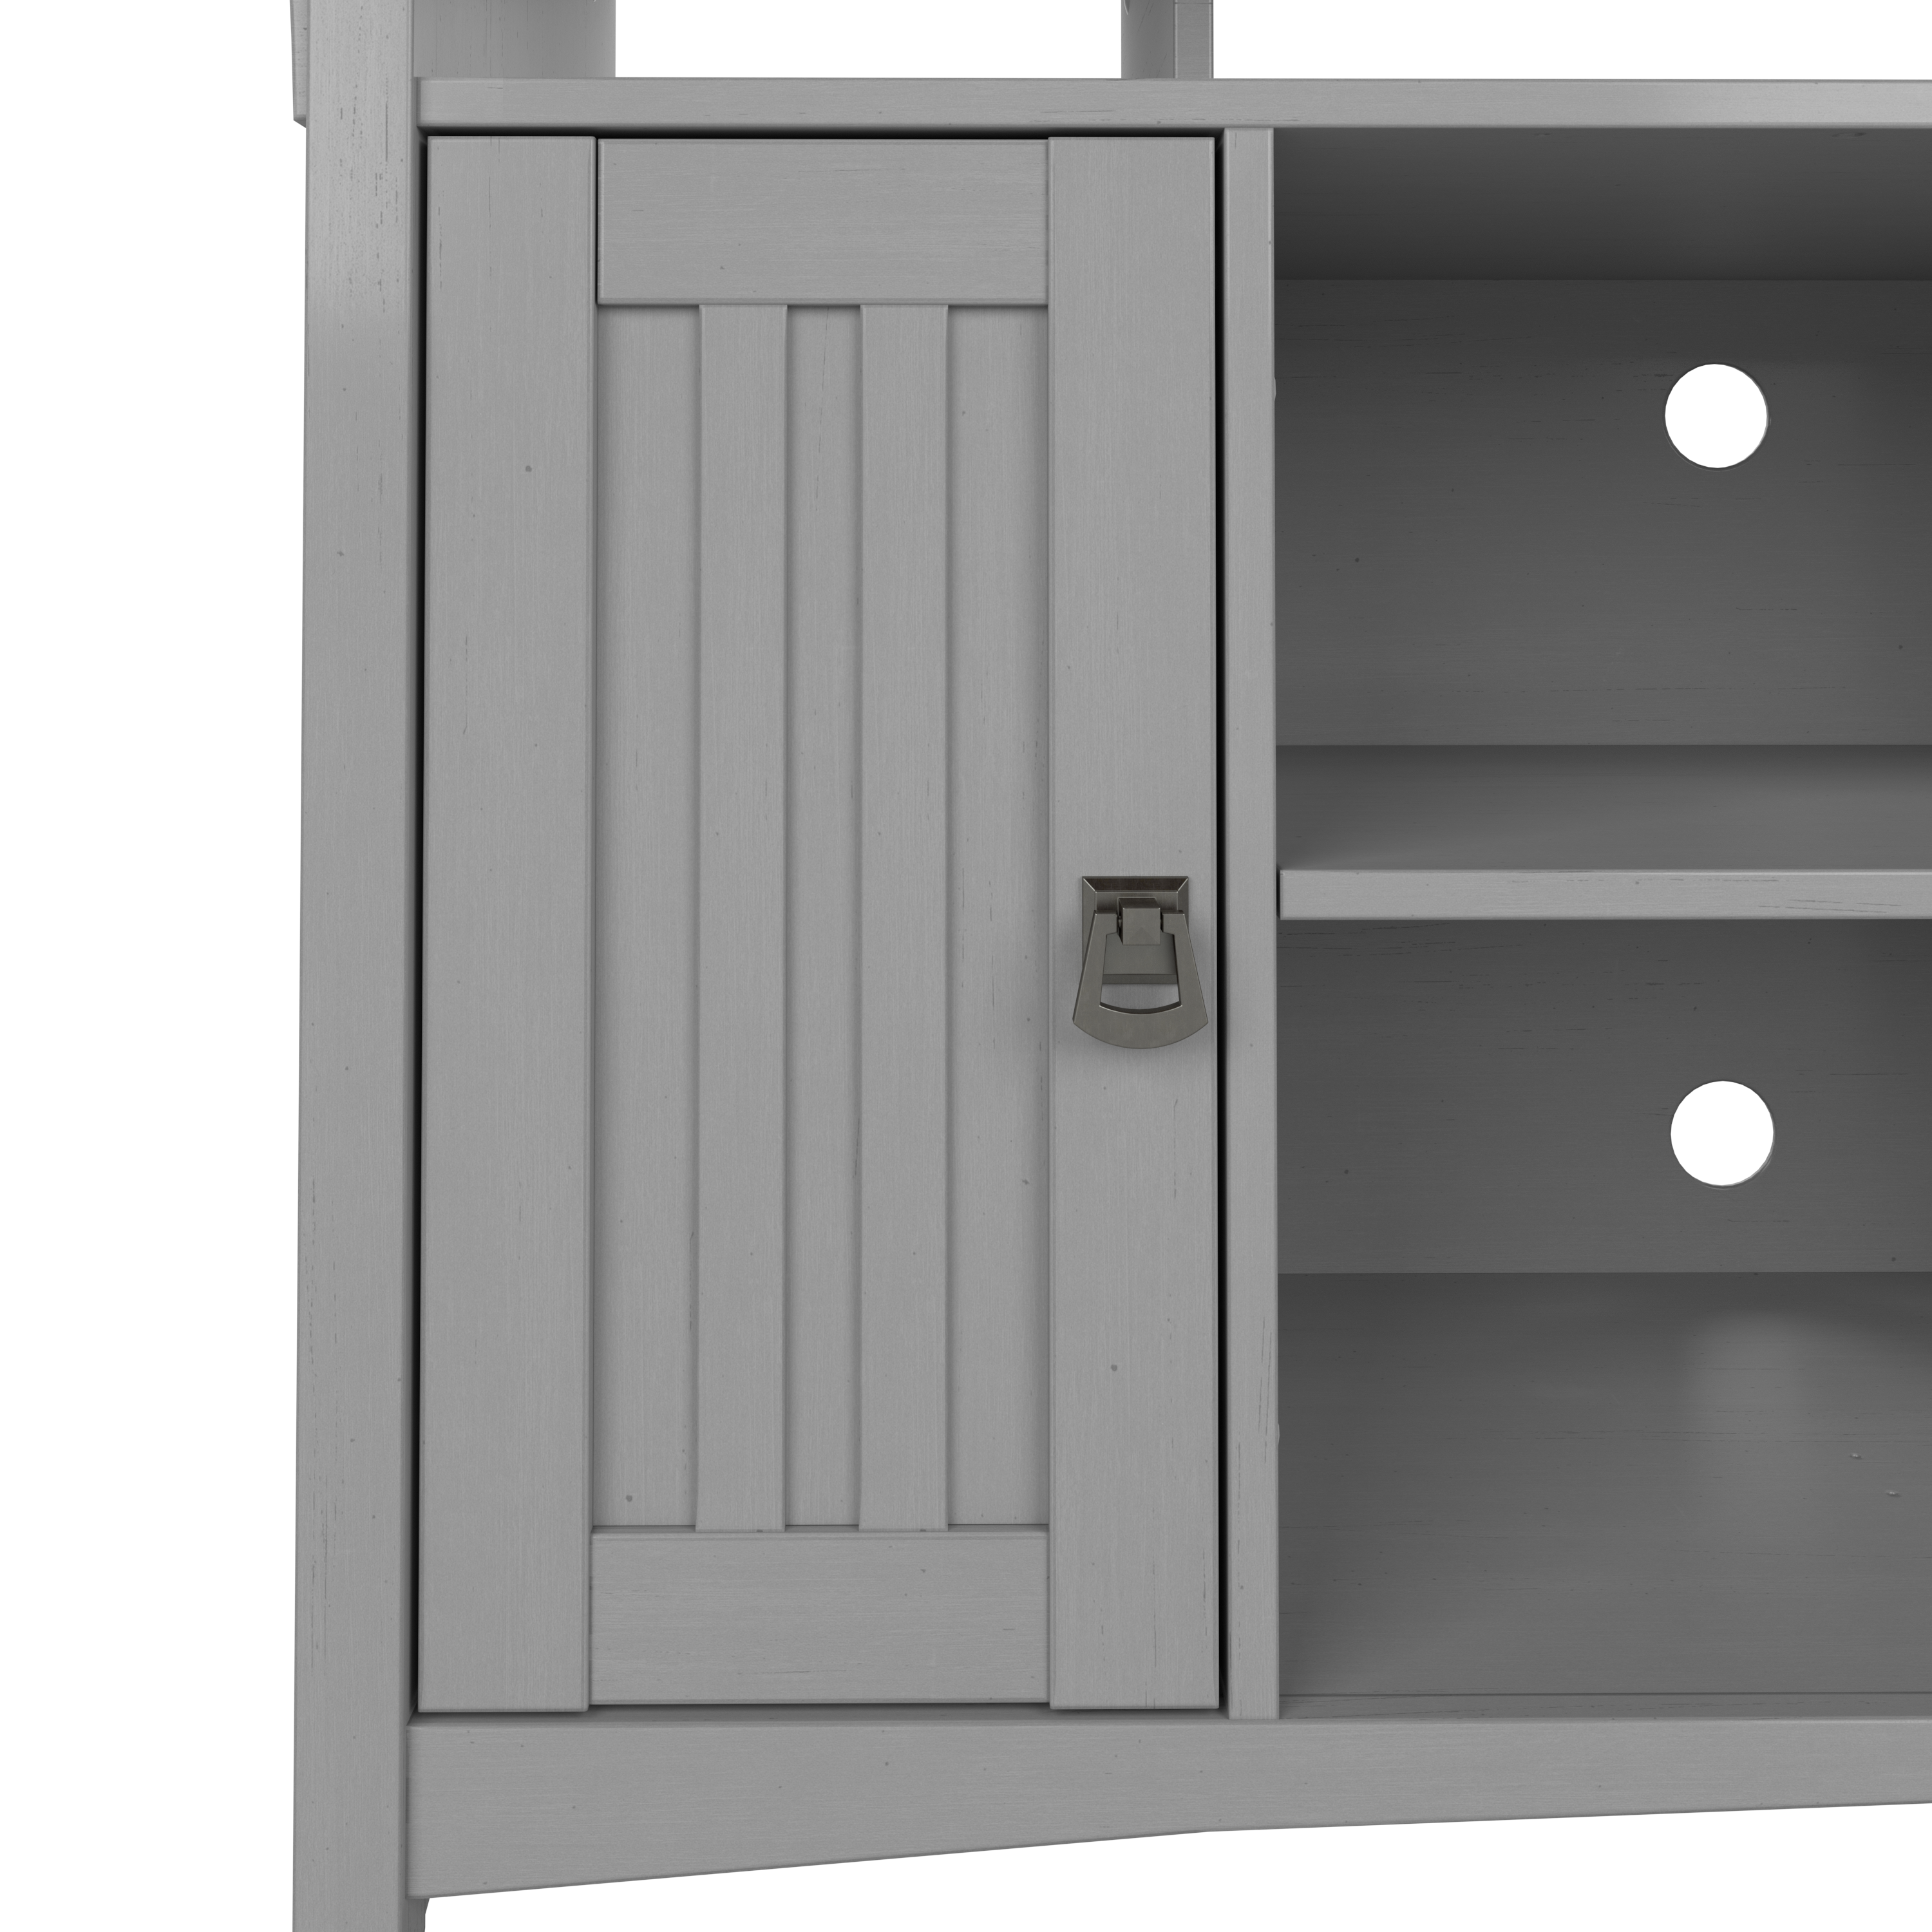 Shop Bush Furniture Salinas Entryway Storage Set with Hall Tree, Shoe Bench and Accent Cabinets 05 SAL016CG #color_cape cod gray